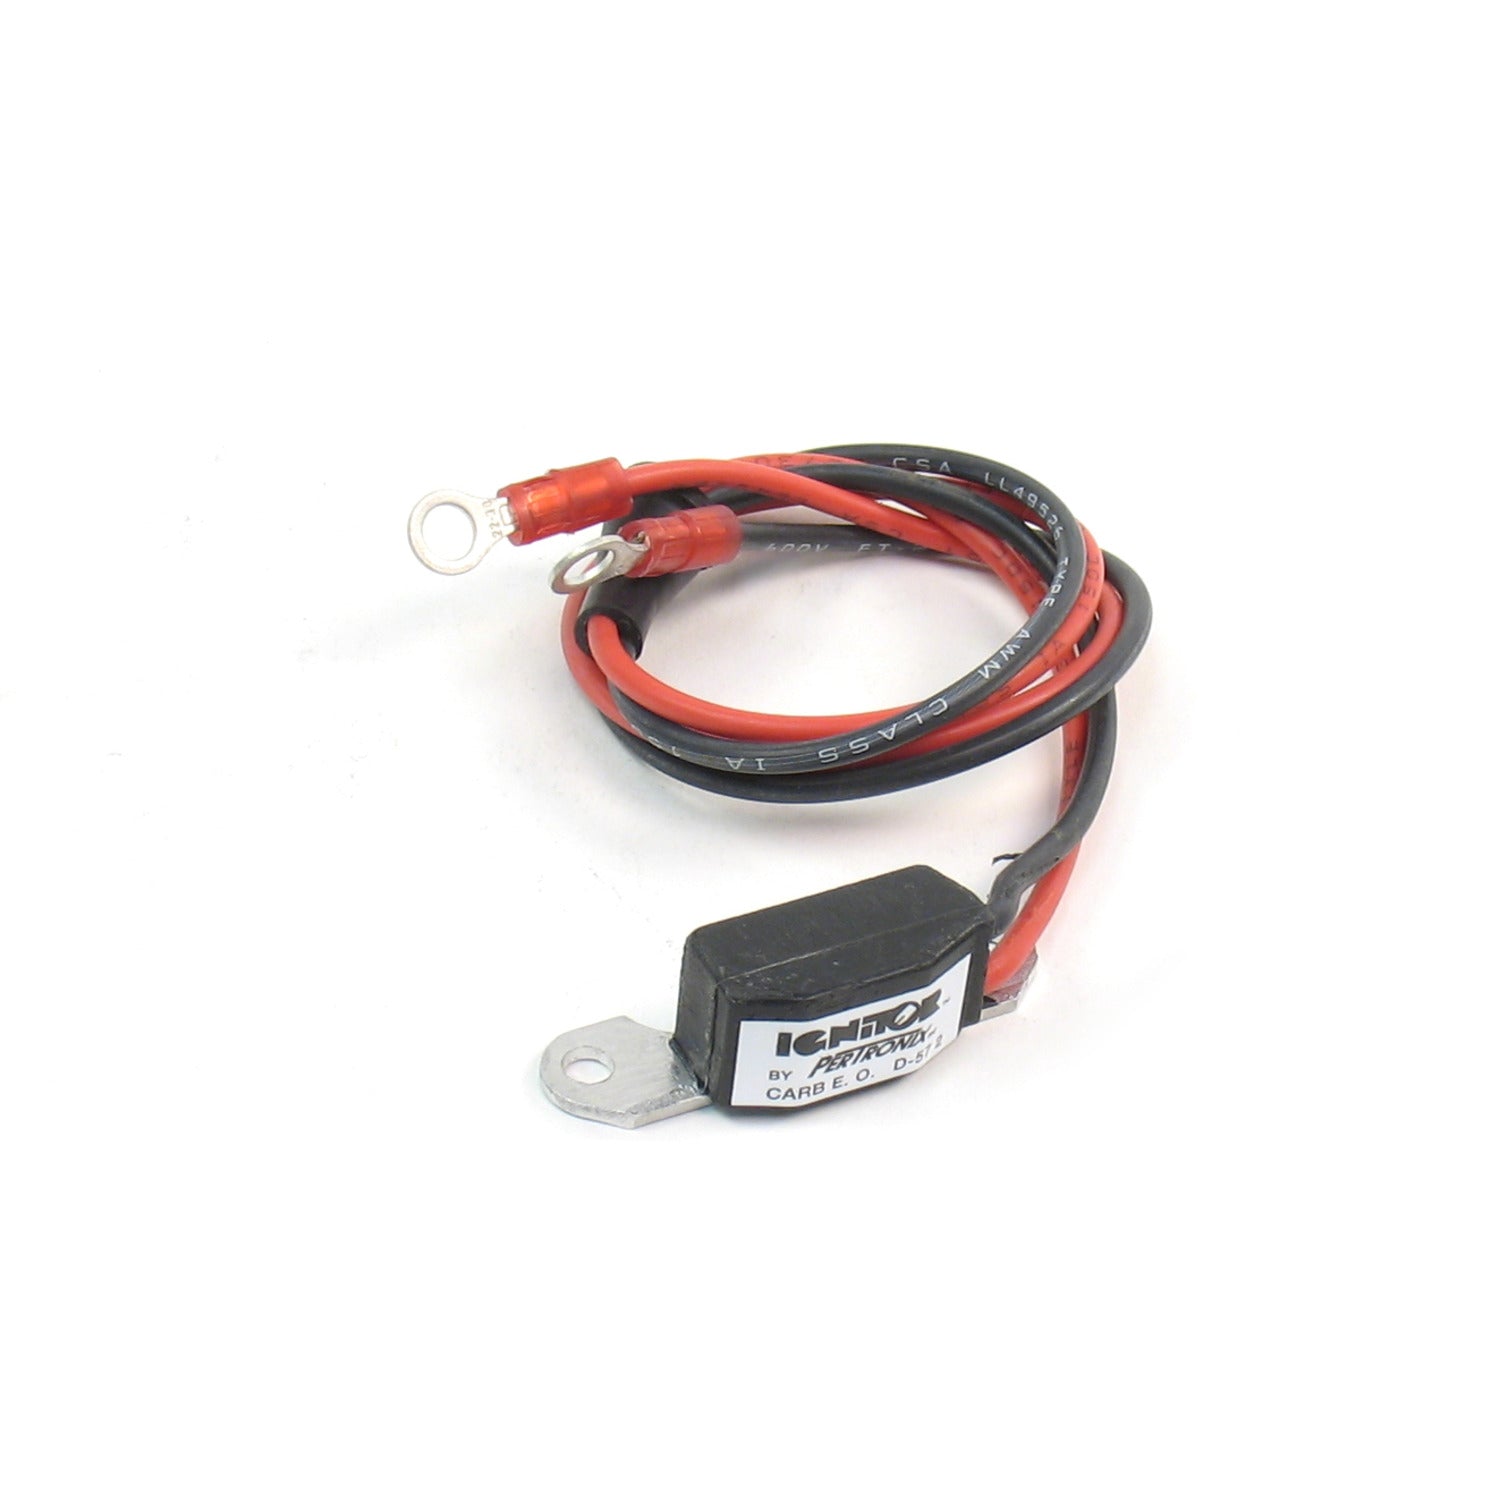 PerTronix D500716 Module (replacement) Ignitor for PerTronix Flame-Thrower Ford Cast Distributor